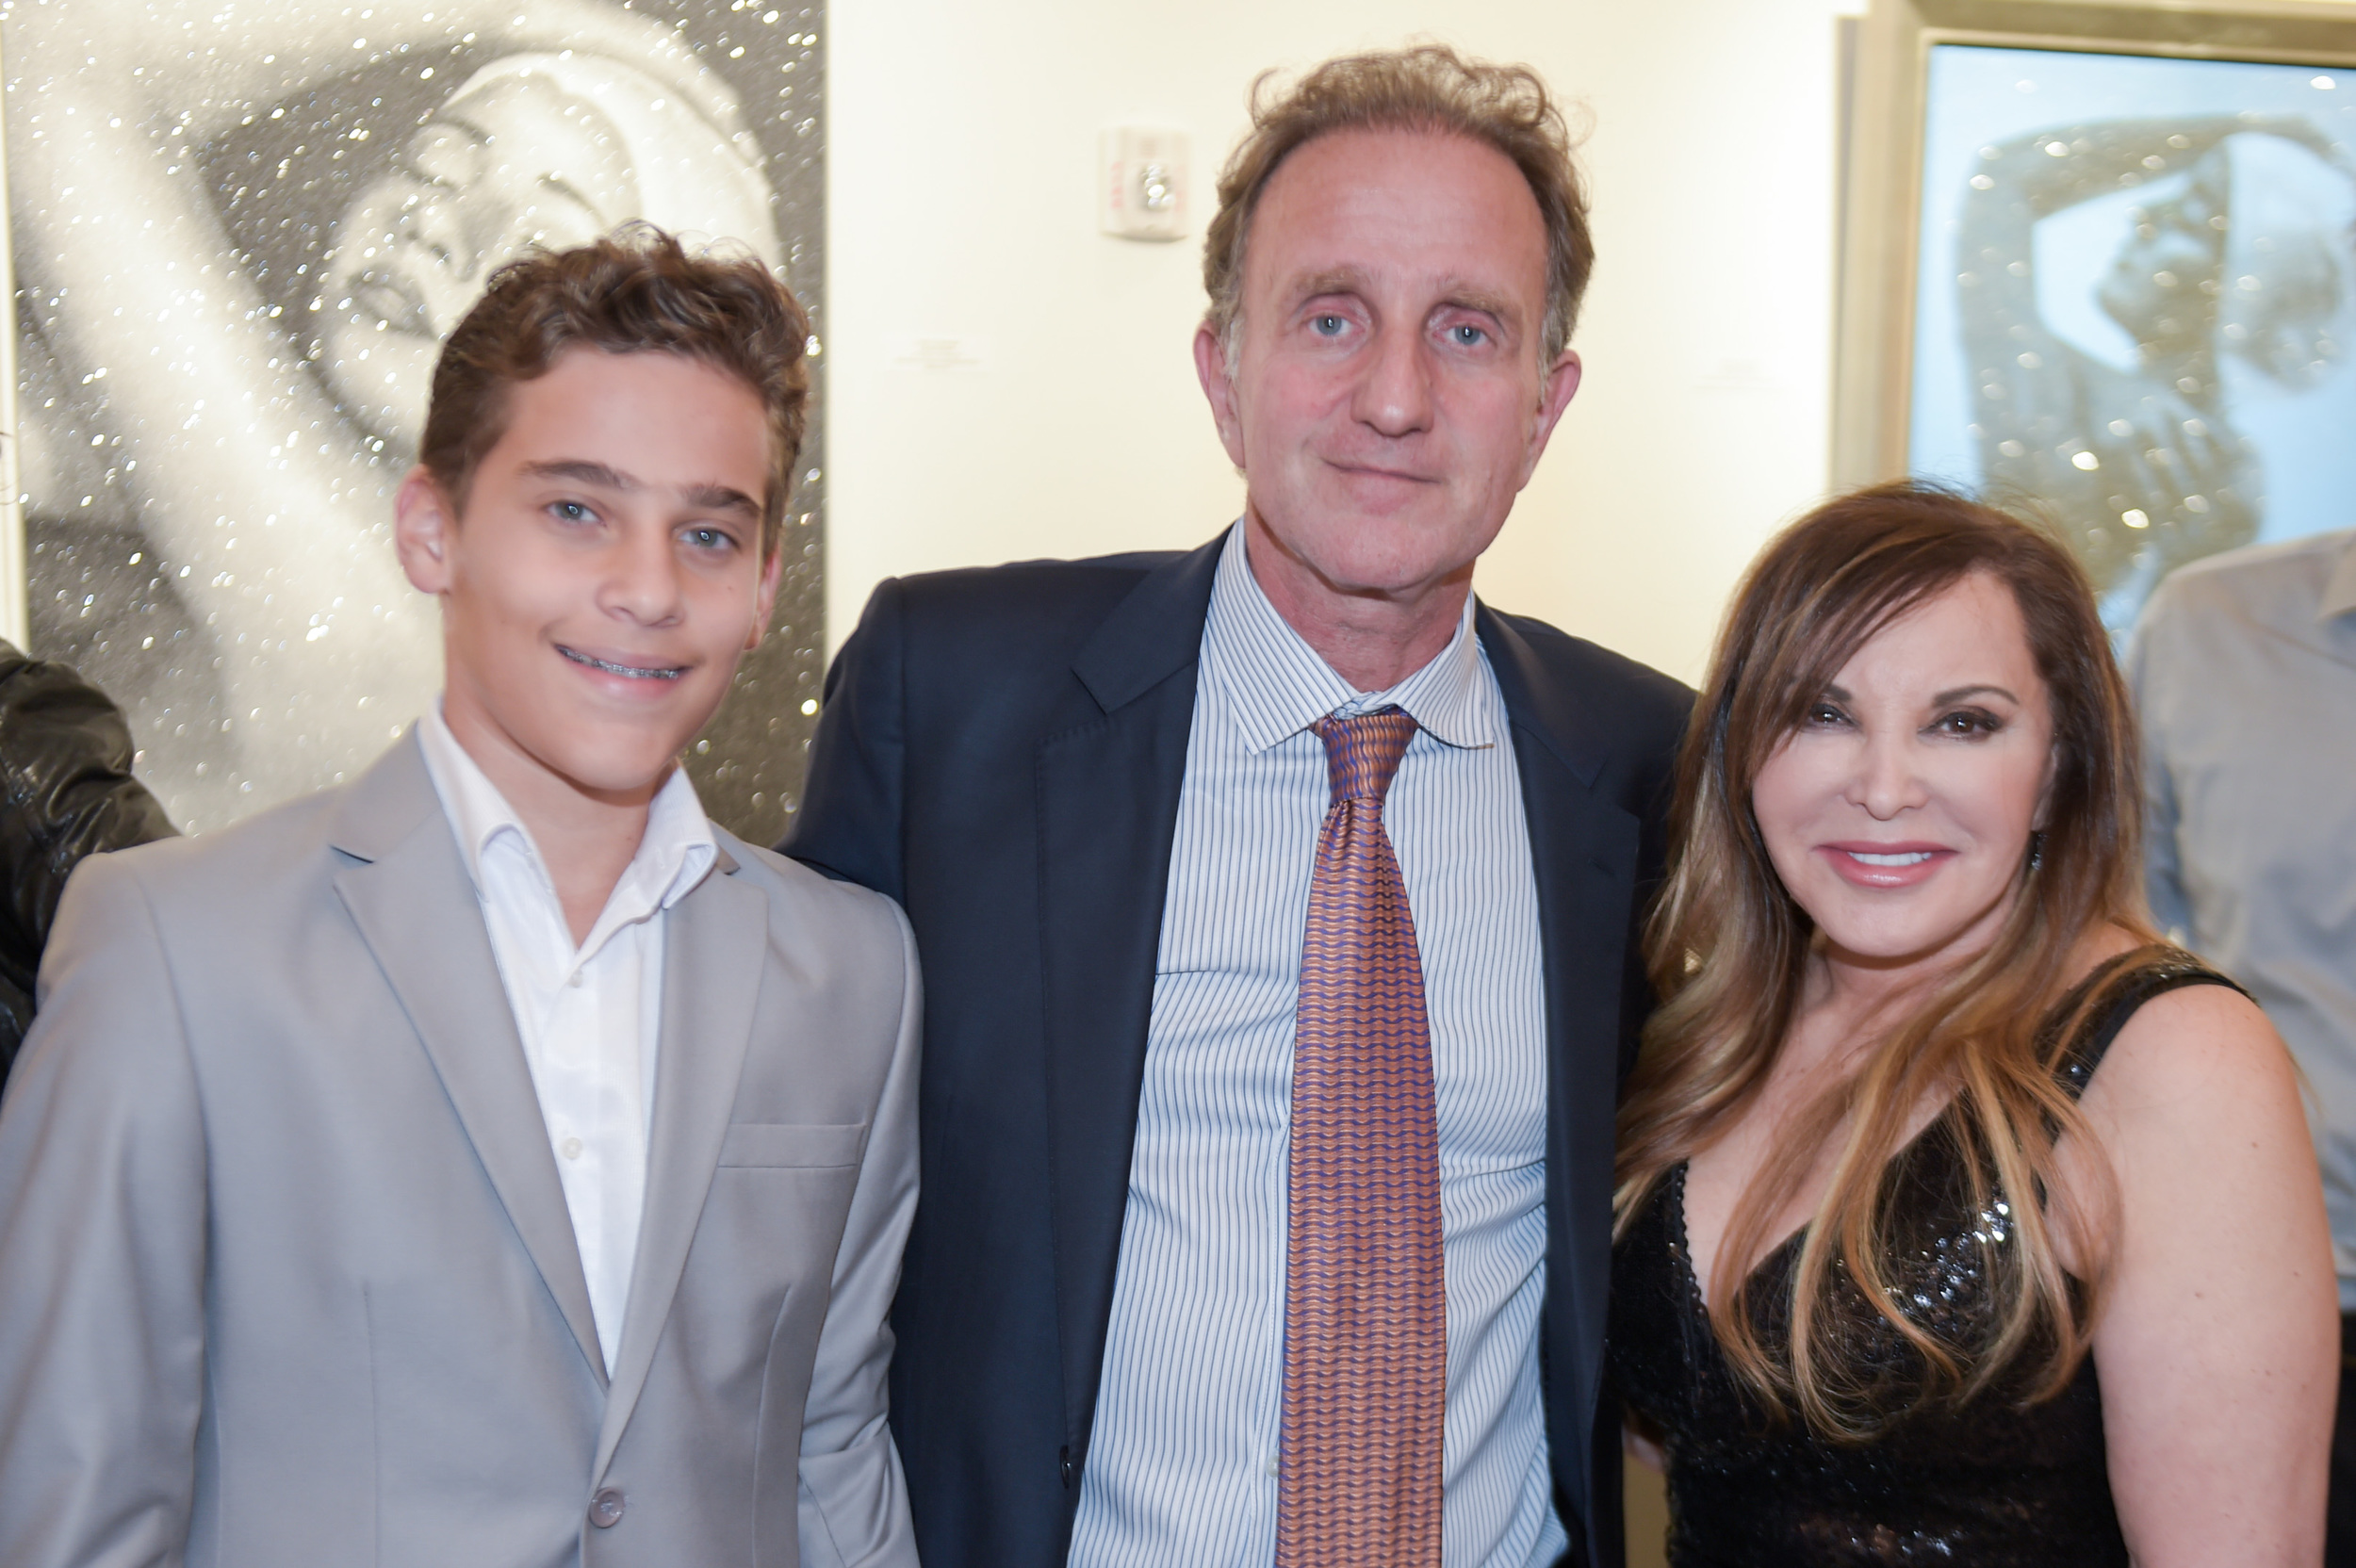 Gallery Owner Bernard Markowicz & son with Carole A. Feuerman at her Solo Show Opening at Markowicz Fine Art, Miami